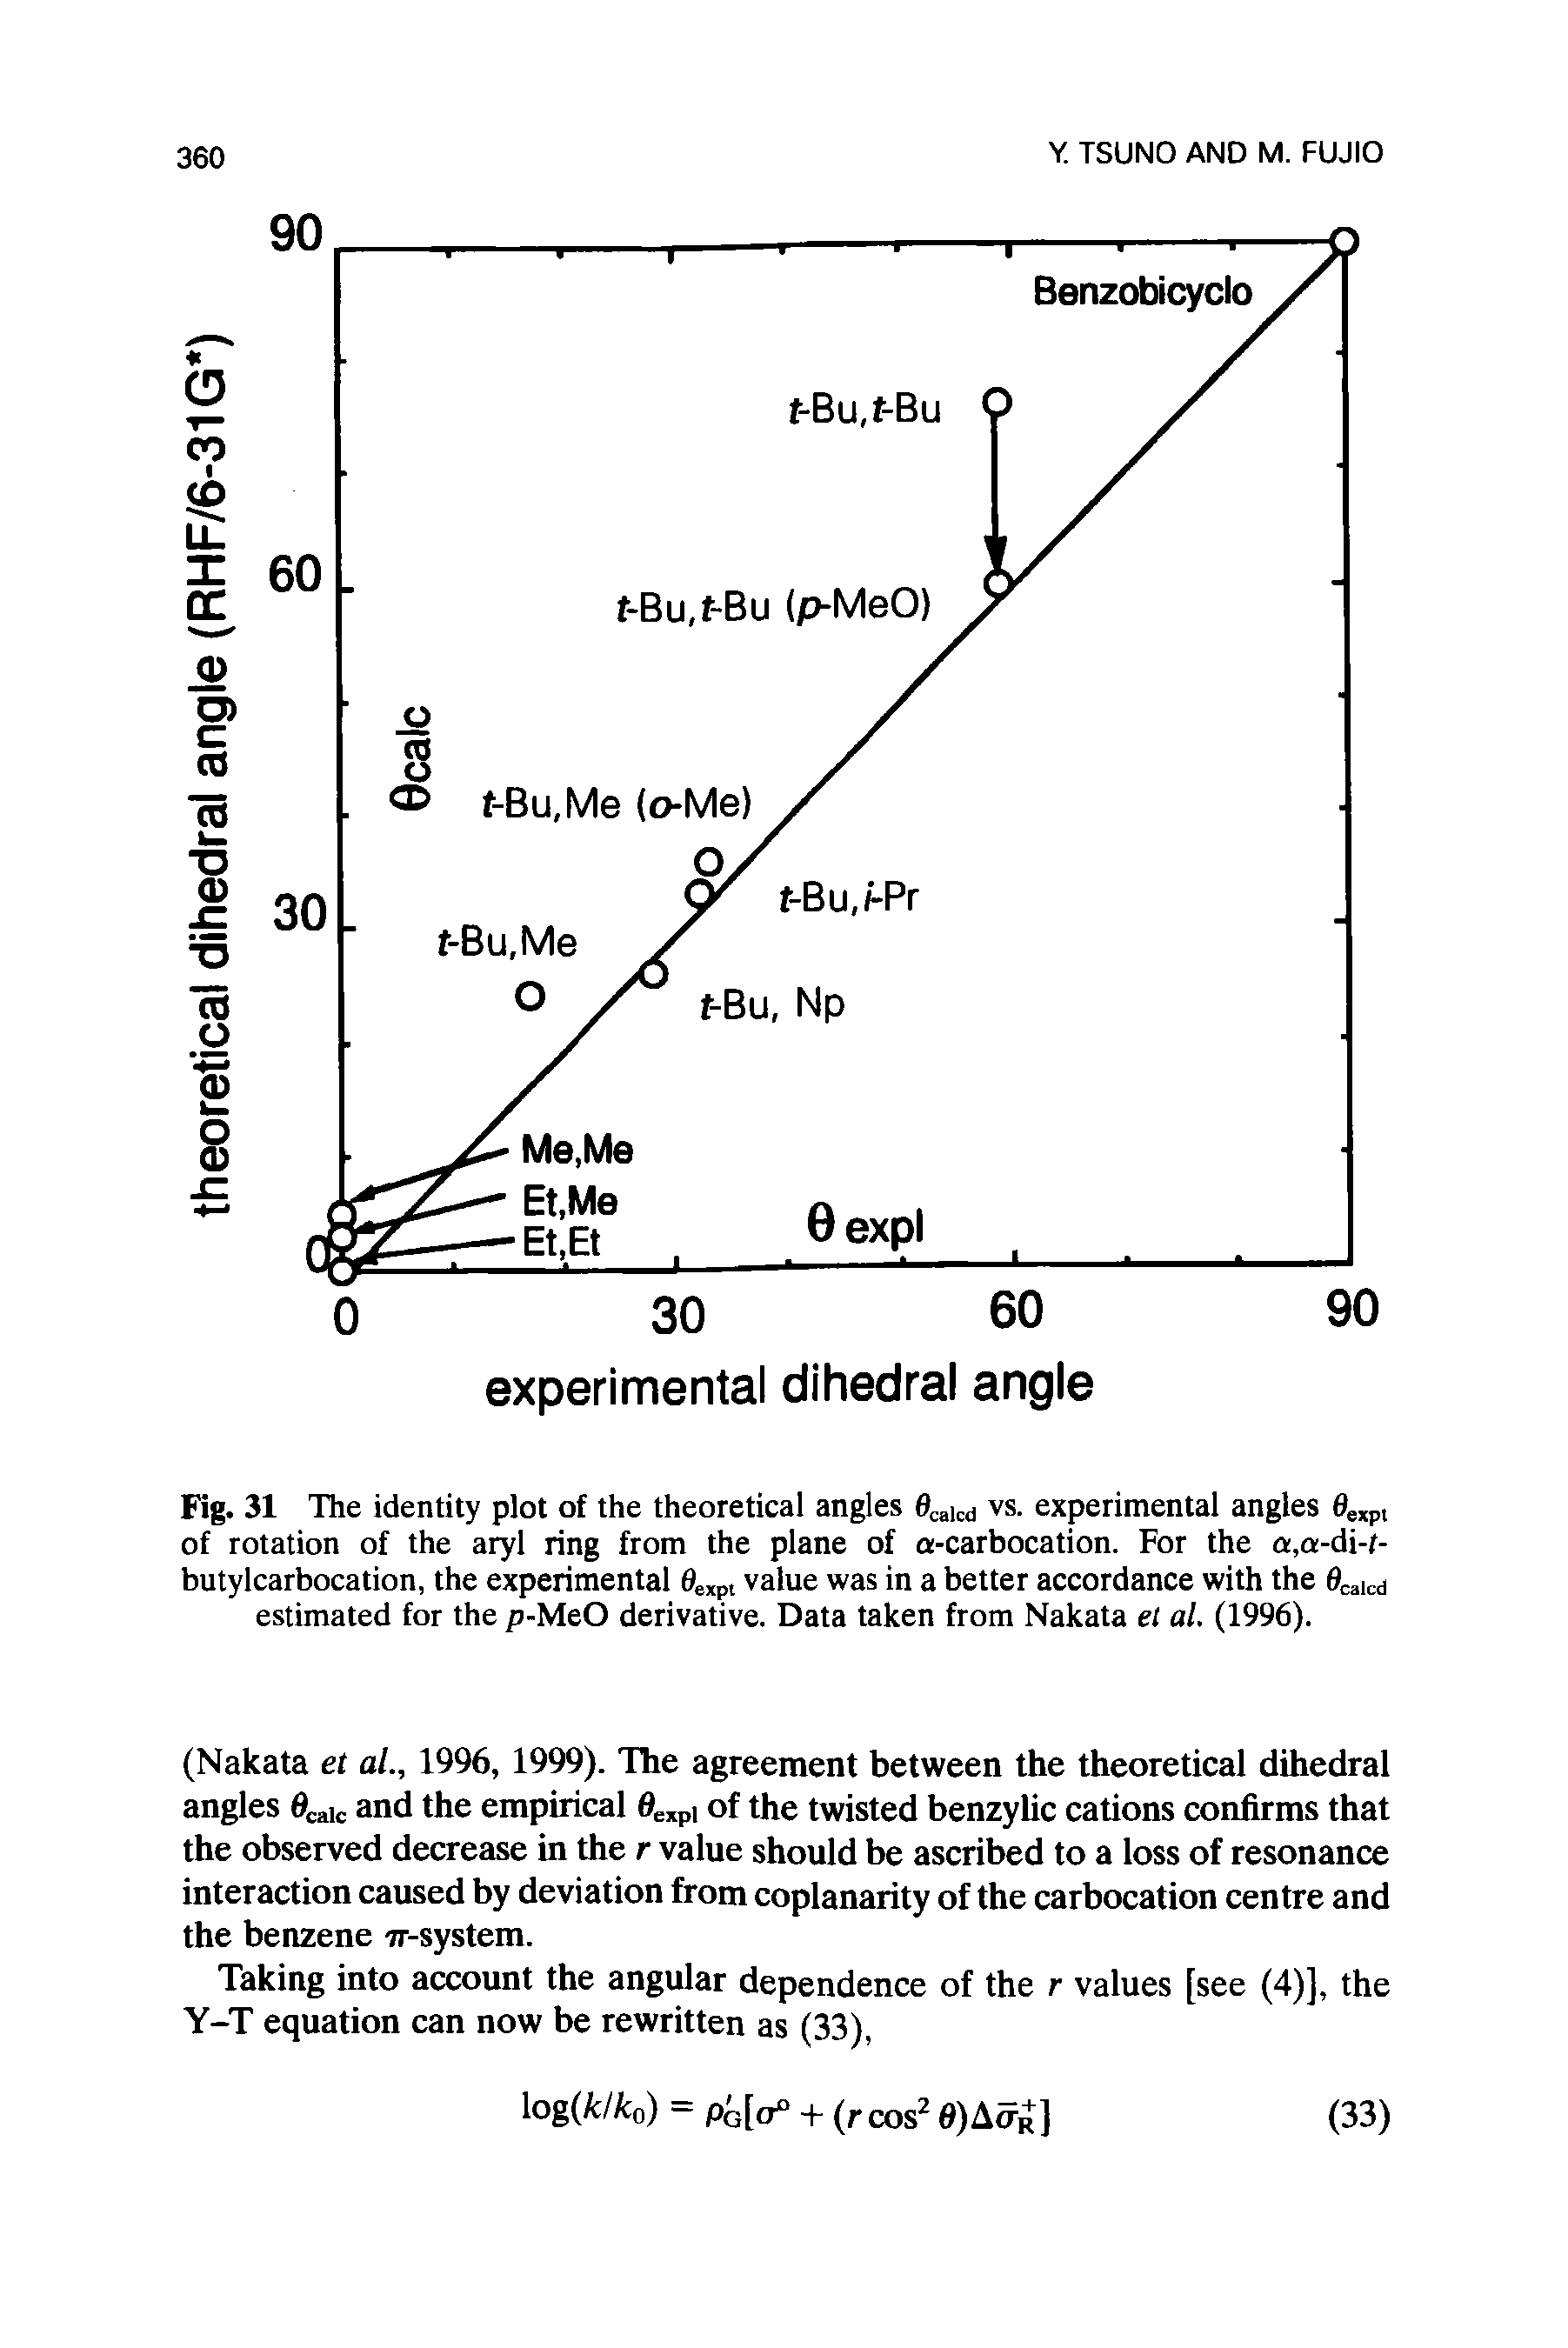 Fig. 31 The identity plot of the theoretical angles fl aicd vs. experimental angles of rotation of the aryl ring from the plane of a-carbocation. For the a,a-di-f-butylcarbocation, the experimental O xpi value was in a better accordance with the 0caicd estimated for the p-MeO derivative. Data taken from Nakata el al. (1996).